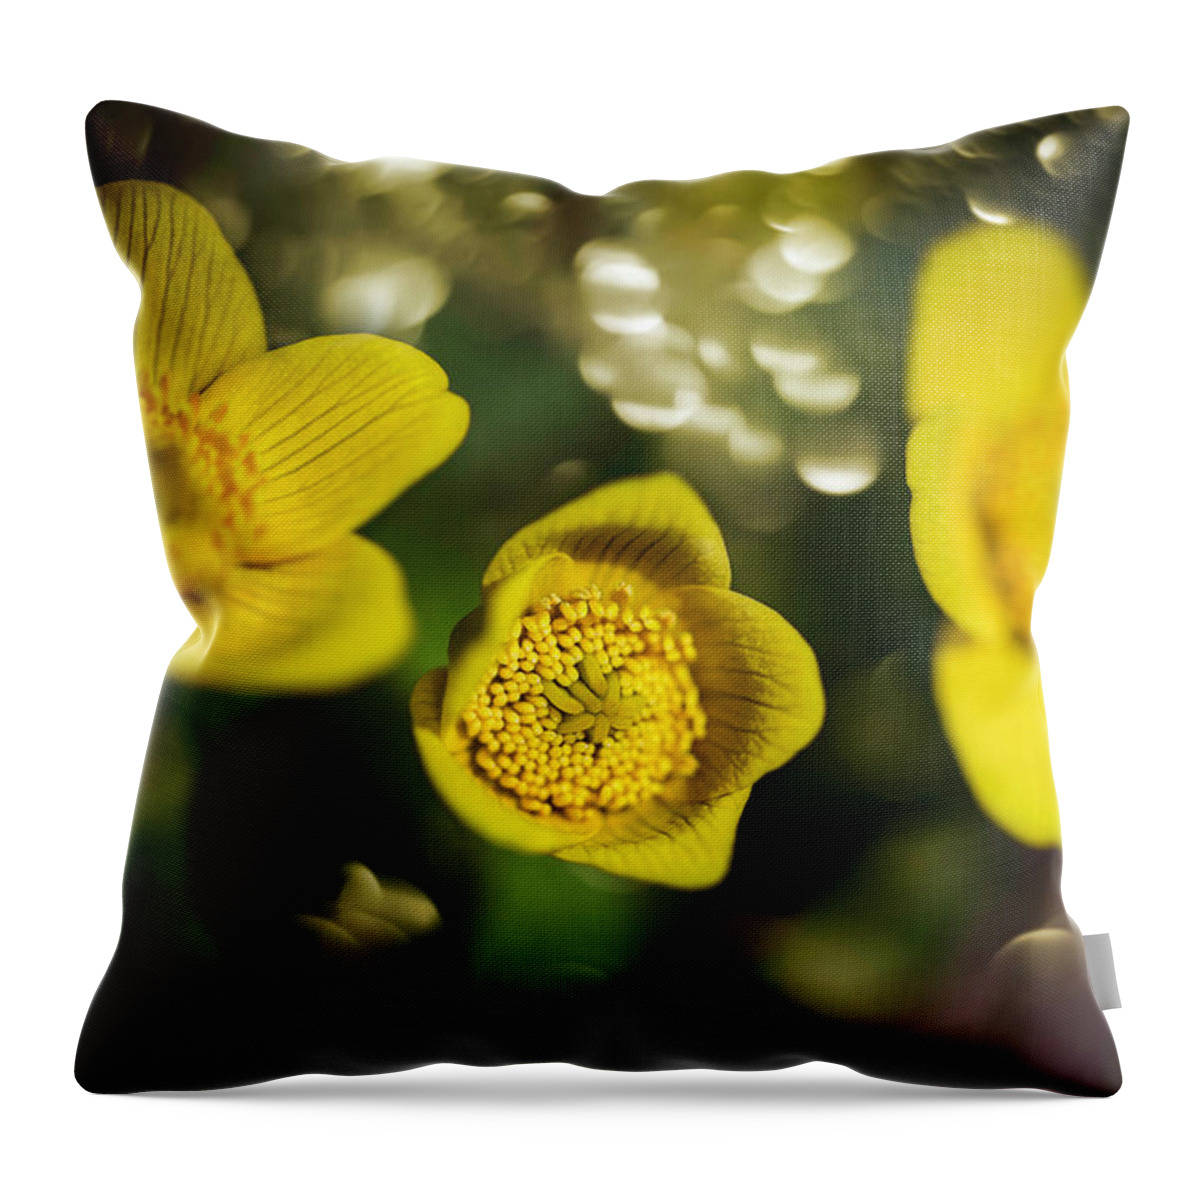  Throw Pillow featuring the photograph Sping Sunnies by Nicole Engstrom